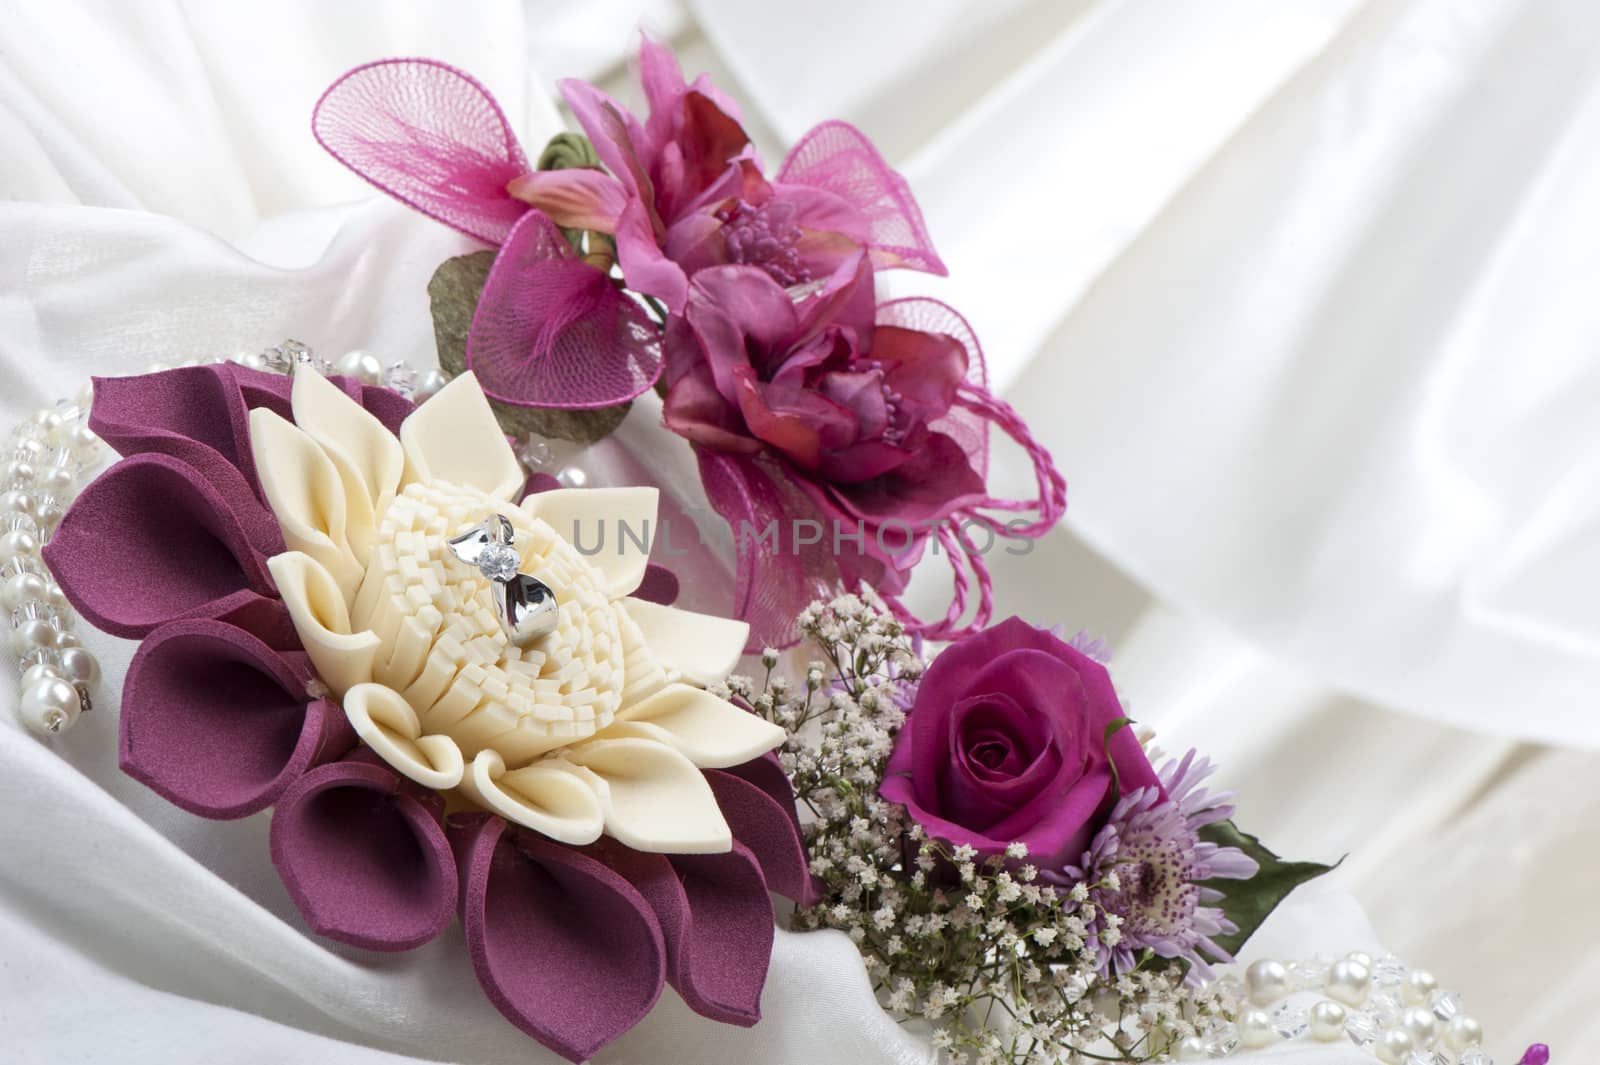 Flower and wedding rings by carla720